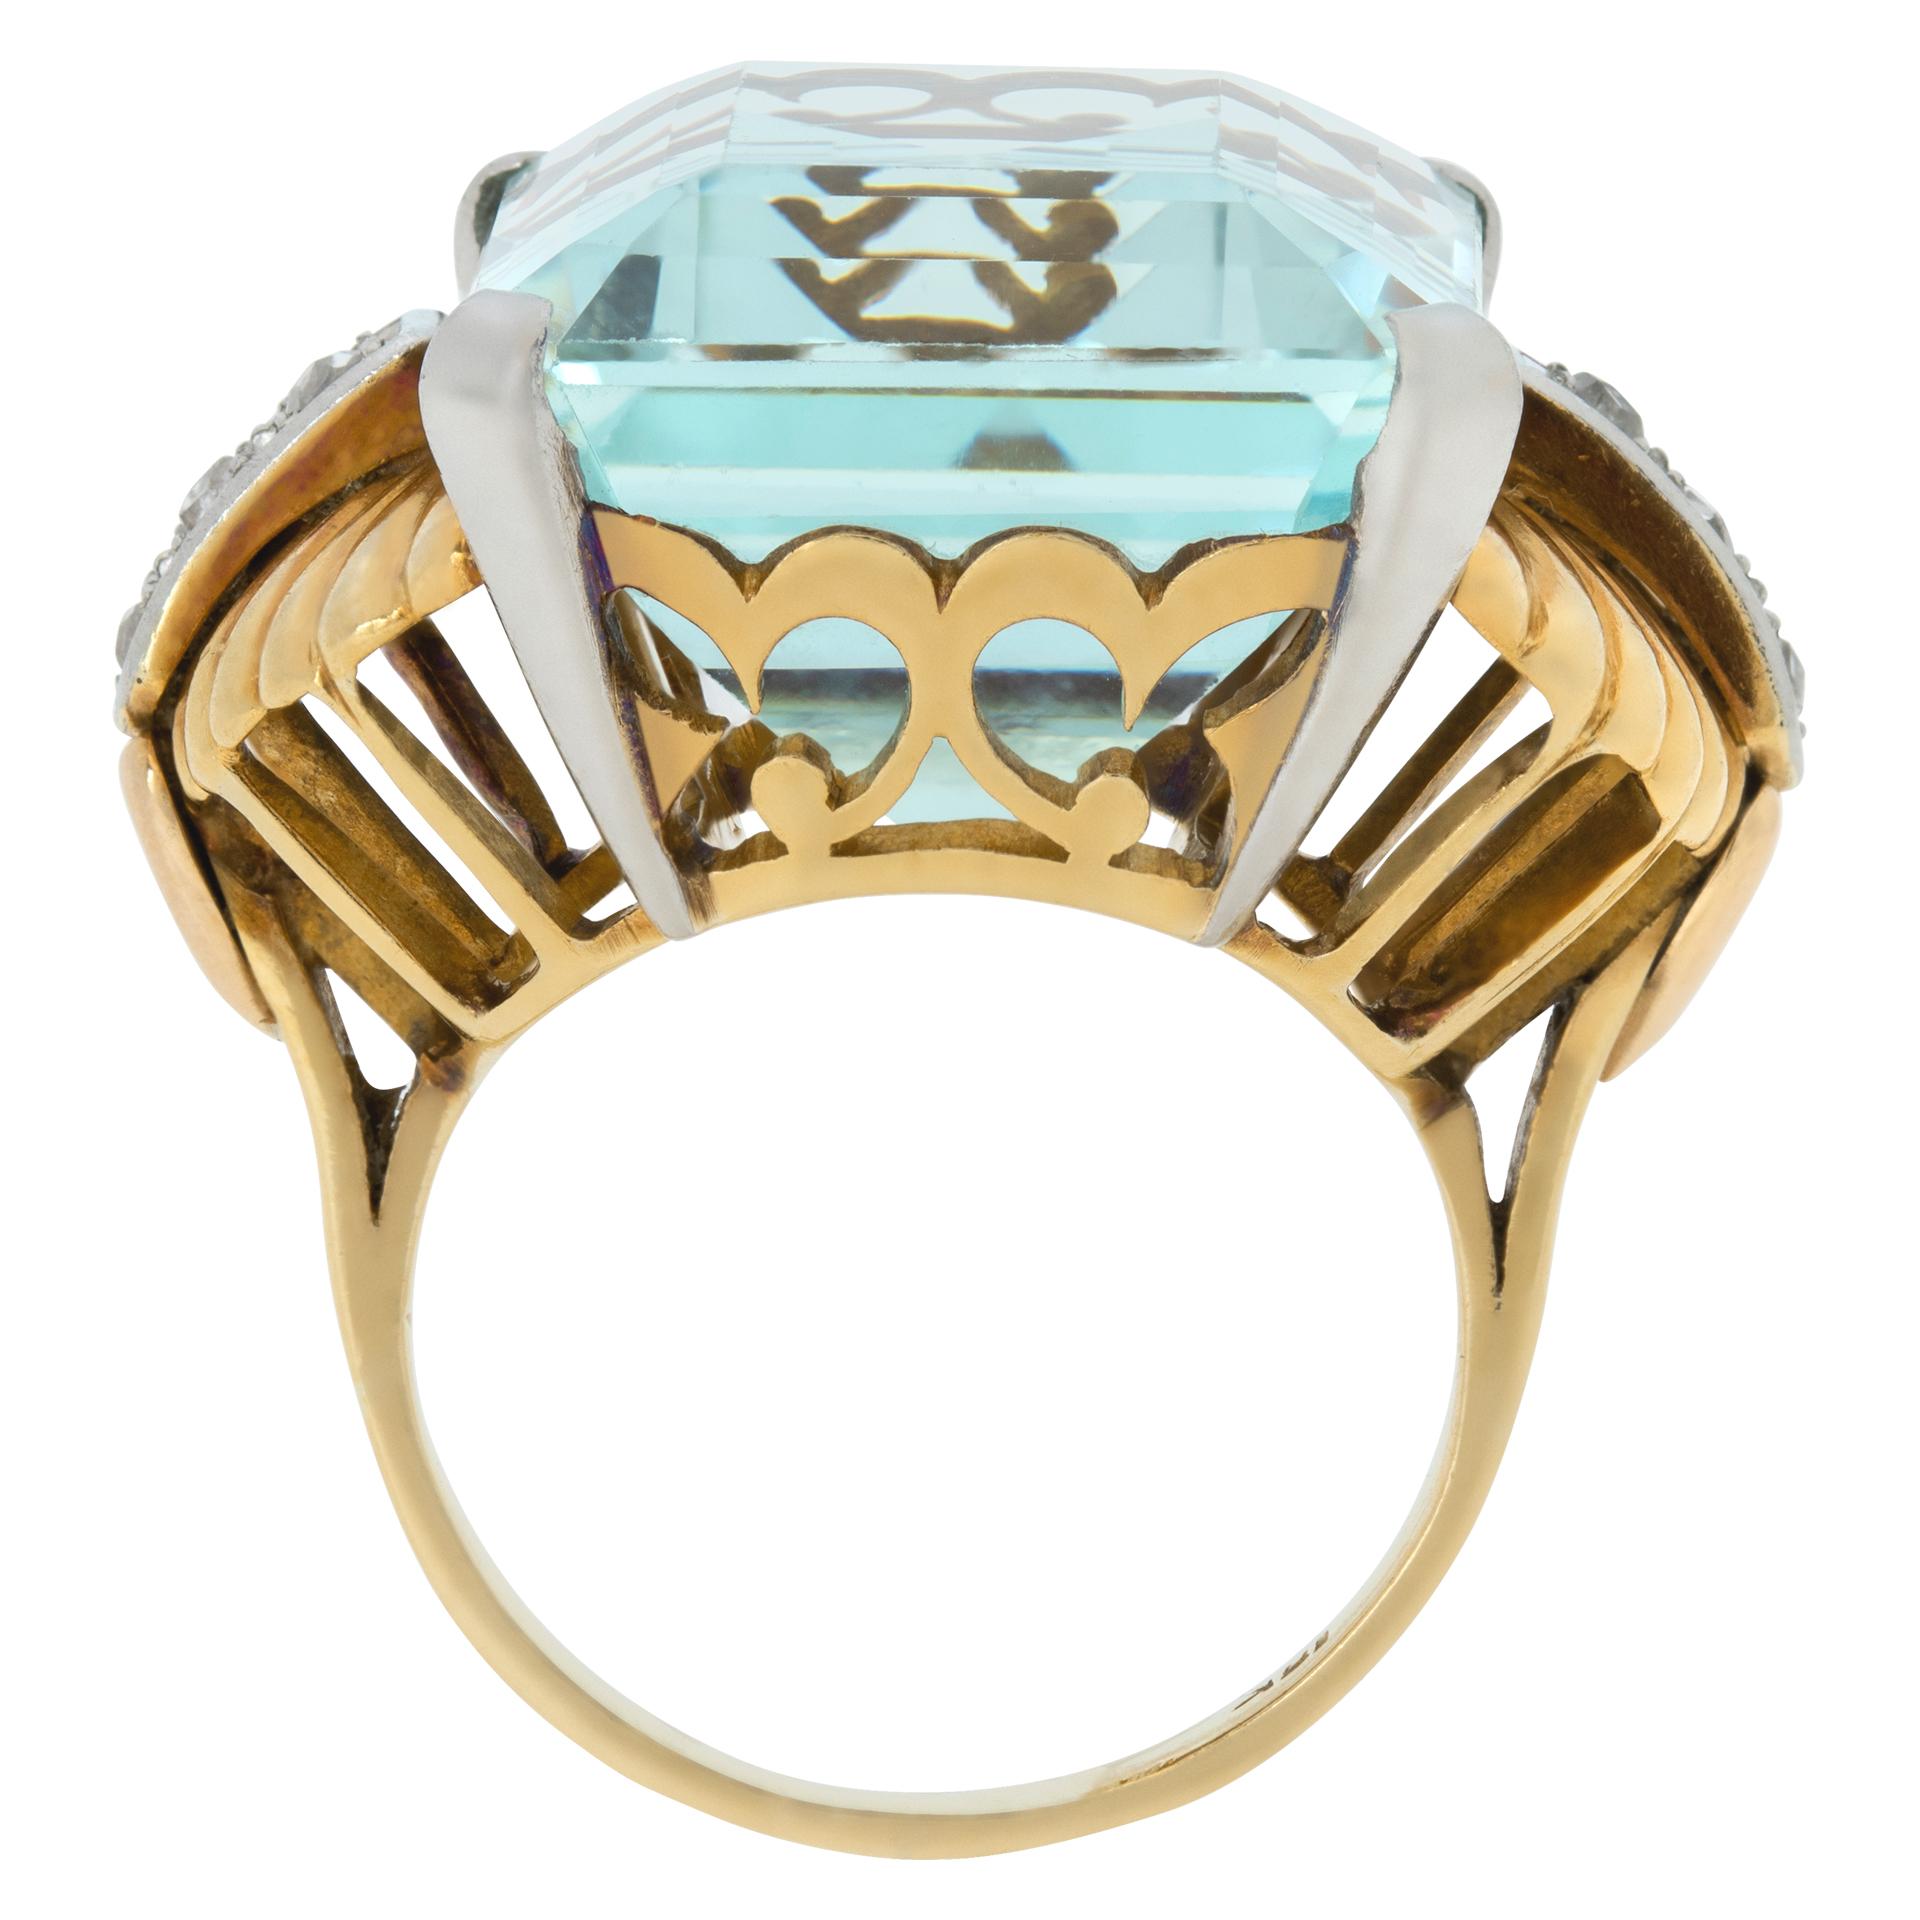 Women's AGL certified Emerald cut Aquamarine approx. 30 carats set in yellow gold ring For Sale